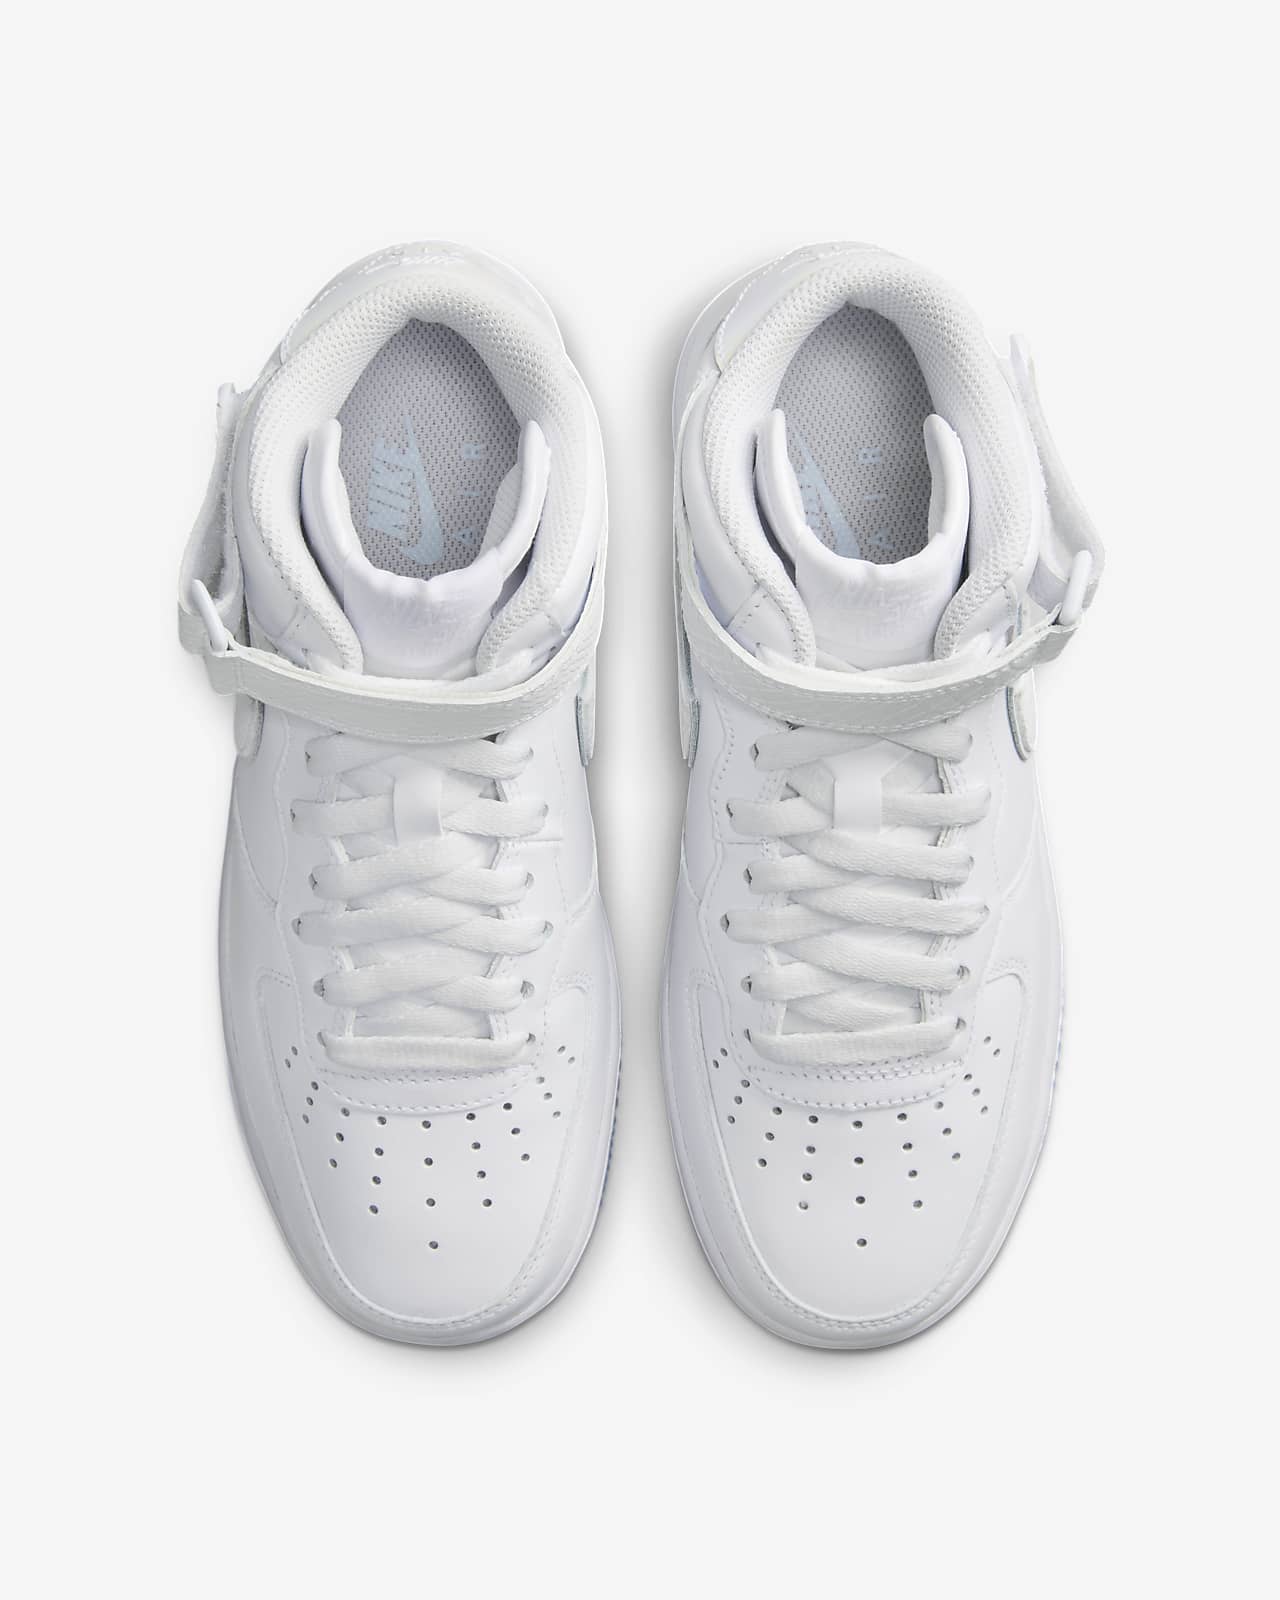 Nike Women's Air Force 1 Mid Shoes in White, Size: 7.5 | FN4274-100